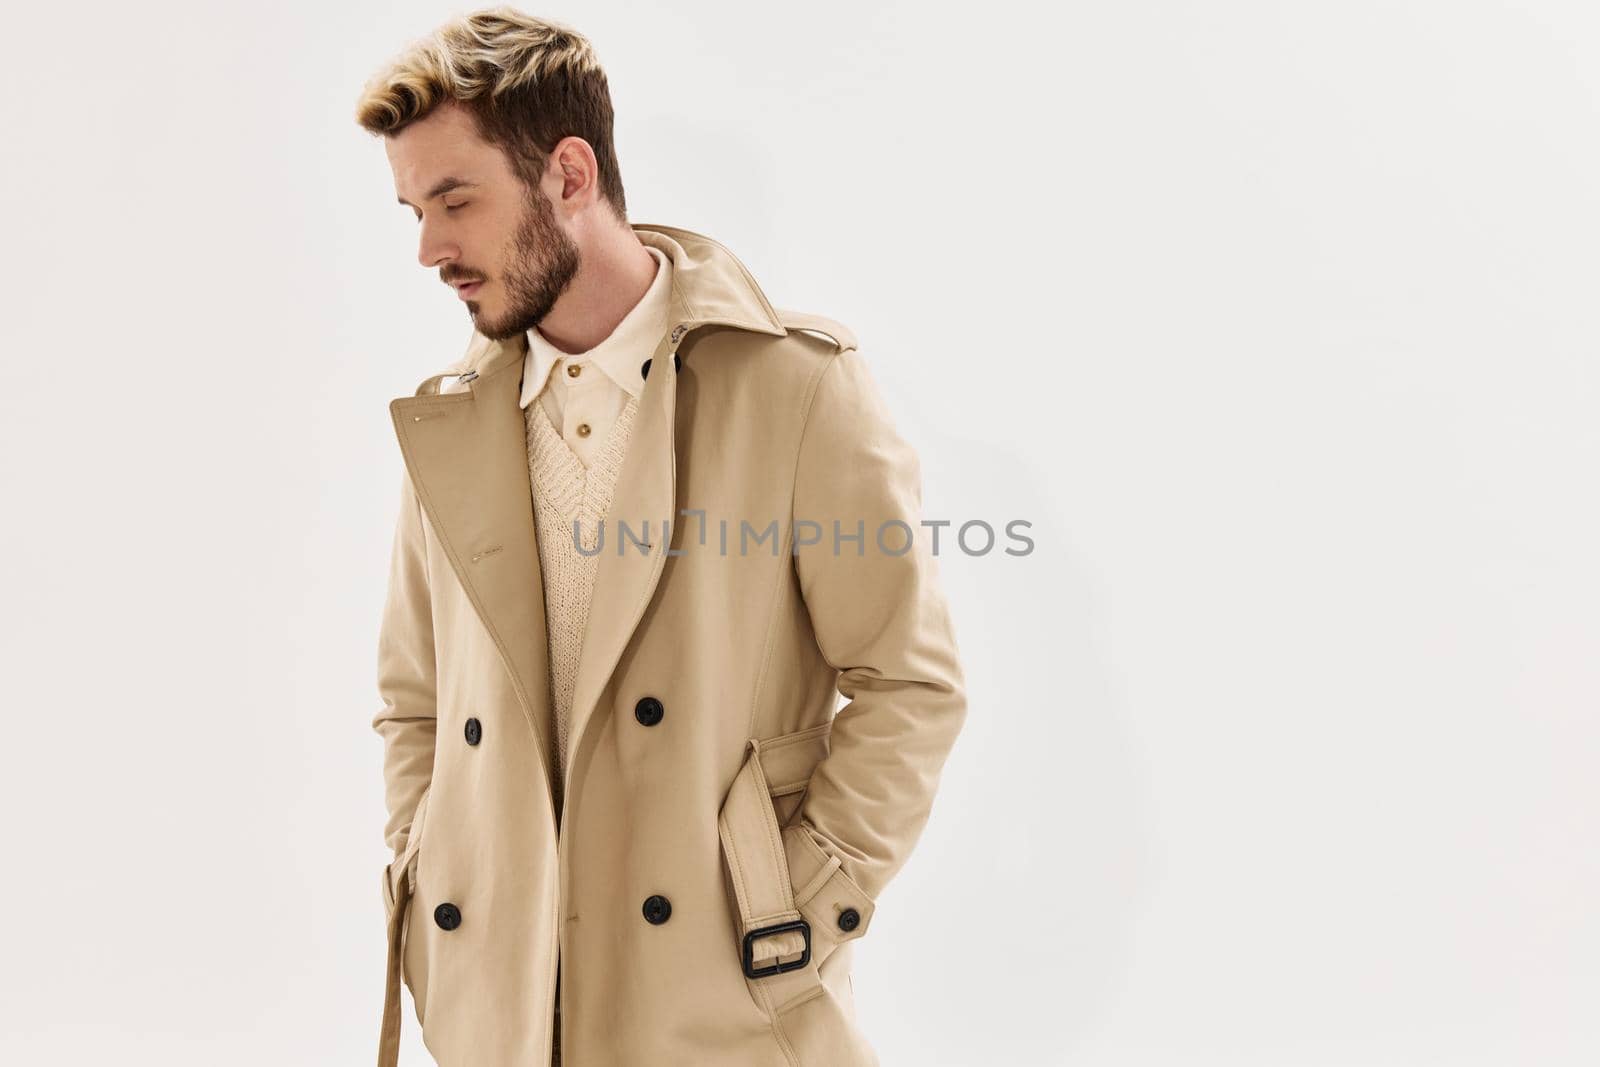 man in coat hands in pocket side view hairstyle modern style. High quality photo